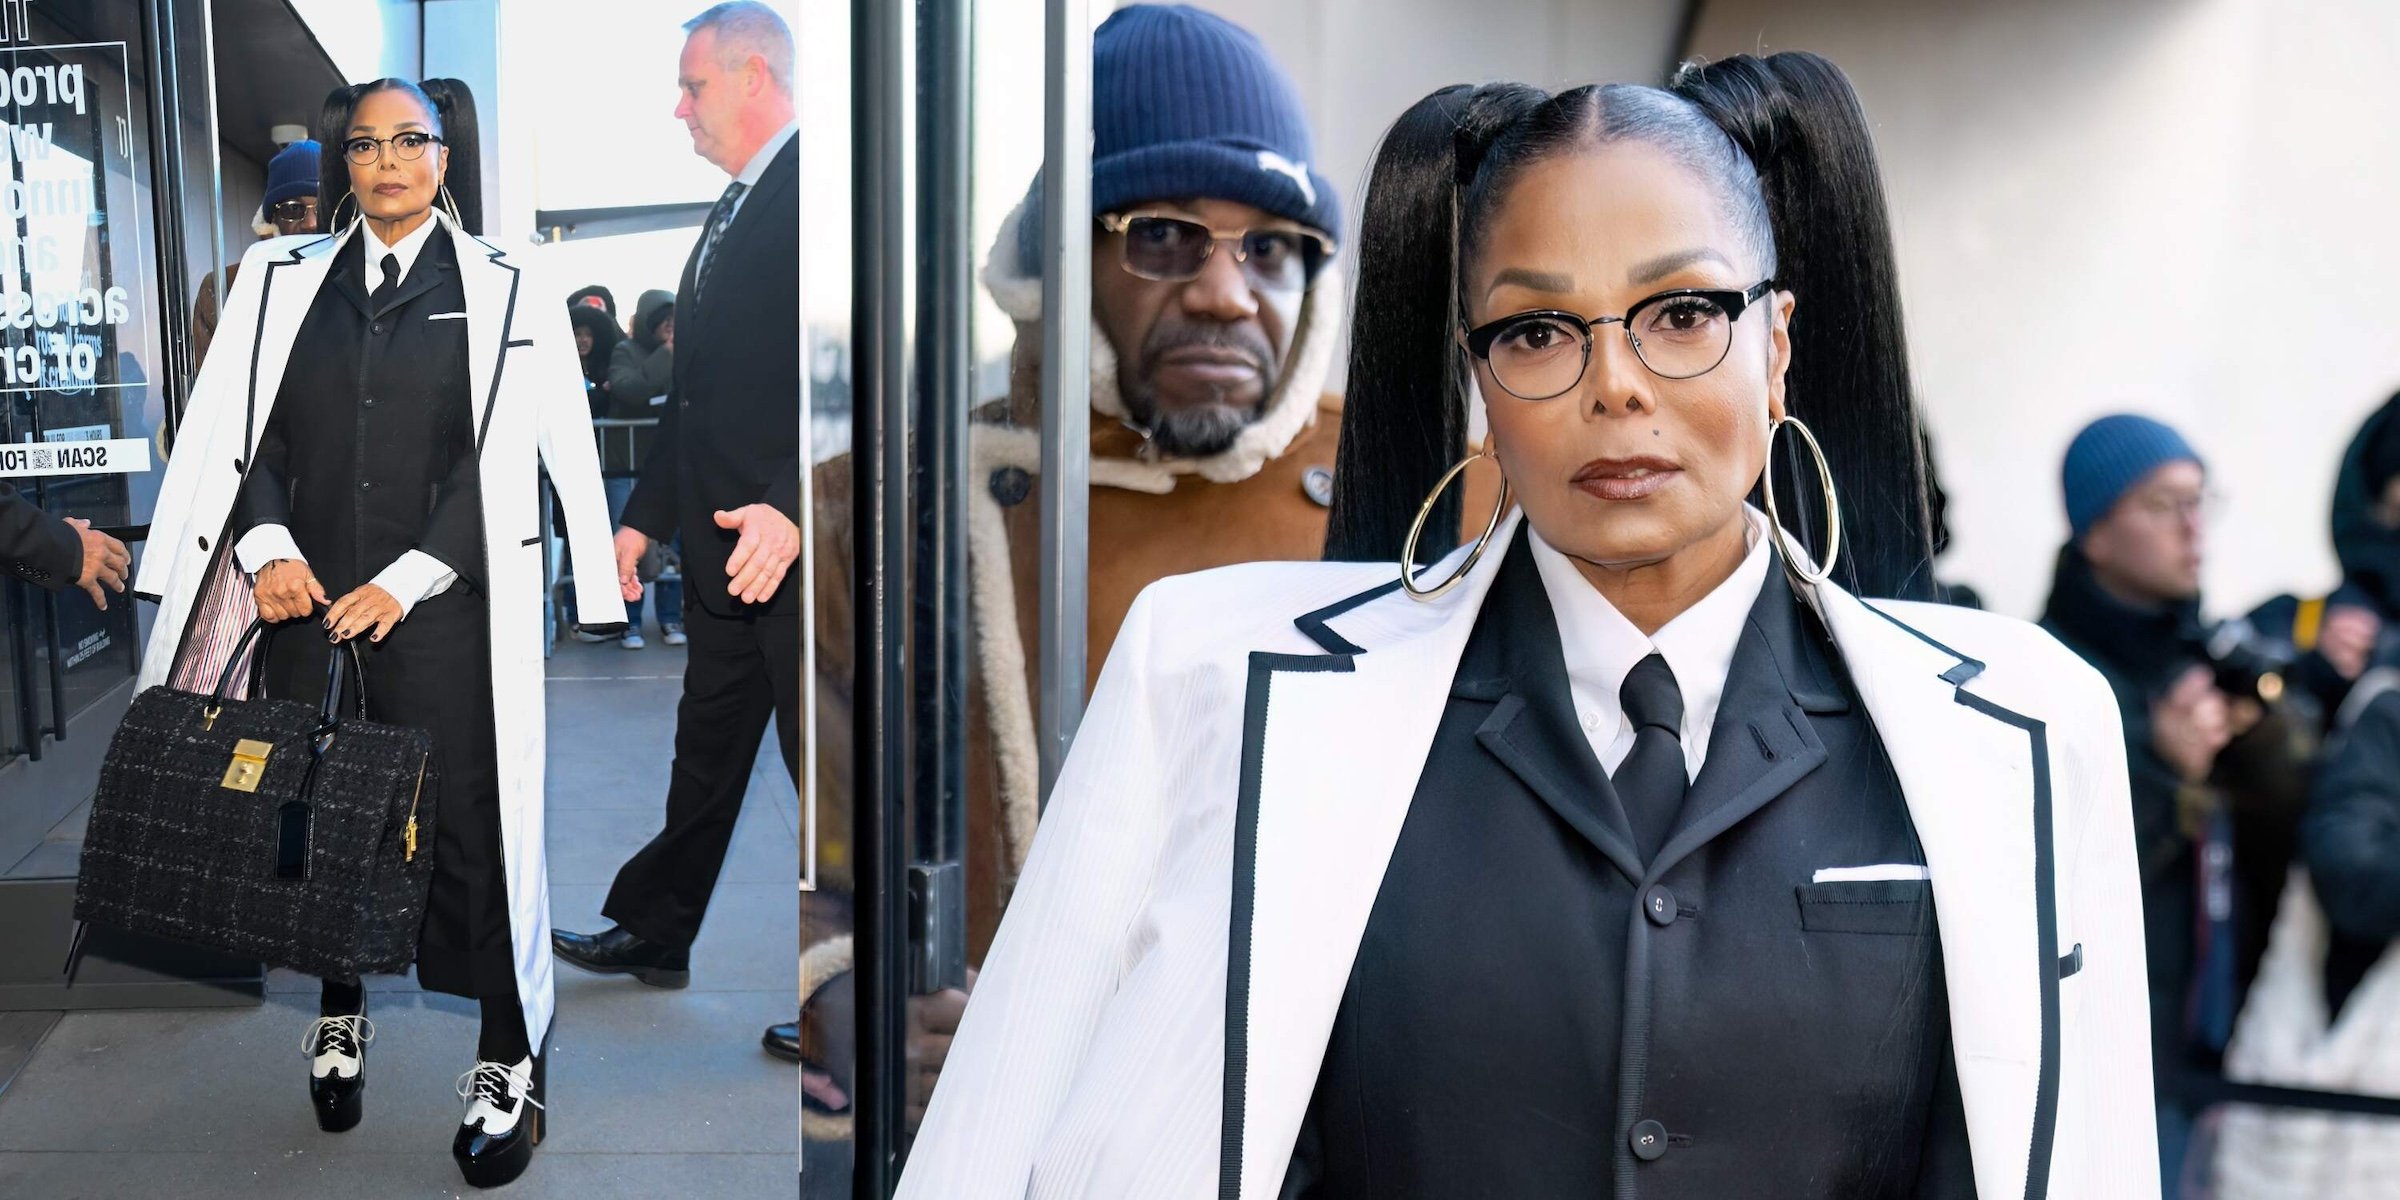 Singer/actress Janet Jackson arrives to the Thom Browne fashion show during New York Fashion Week wearing a black suit and white tuxedo overcoat